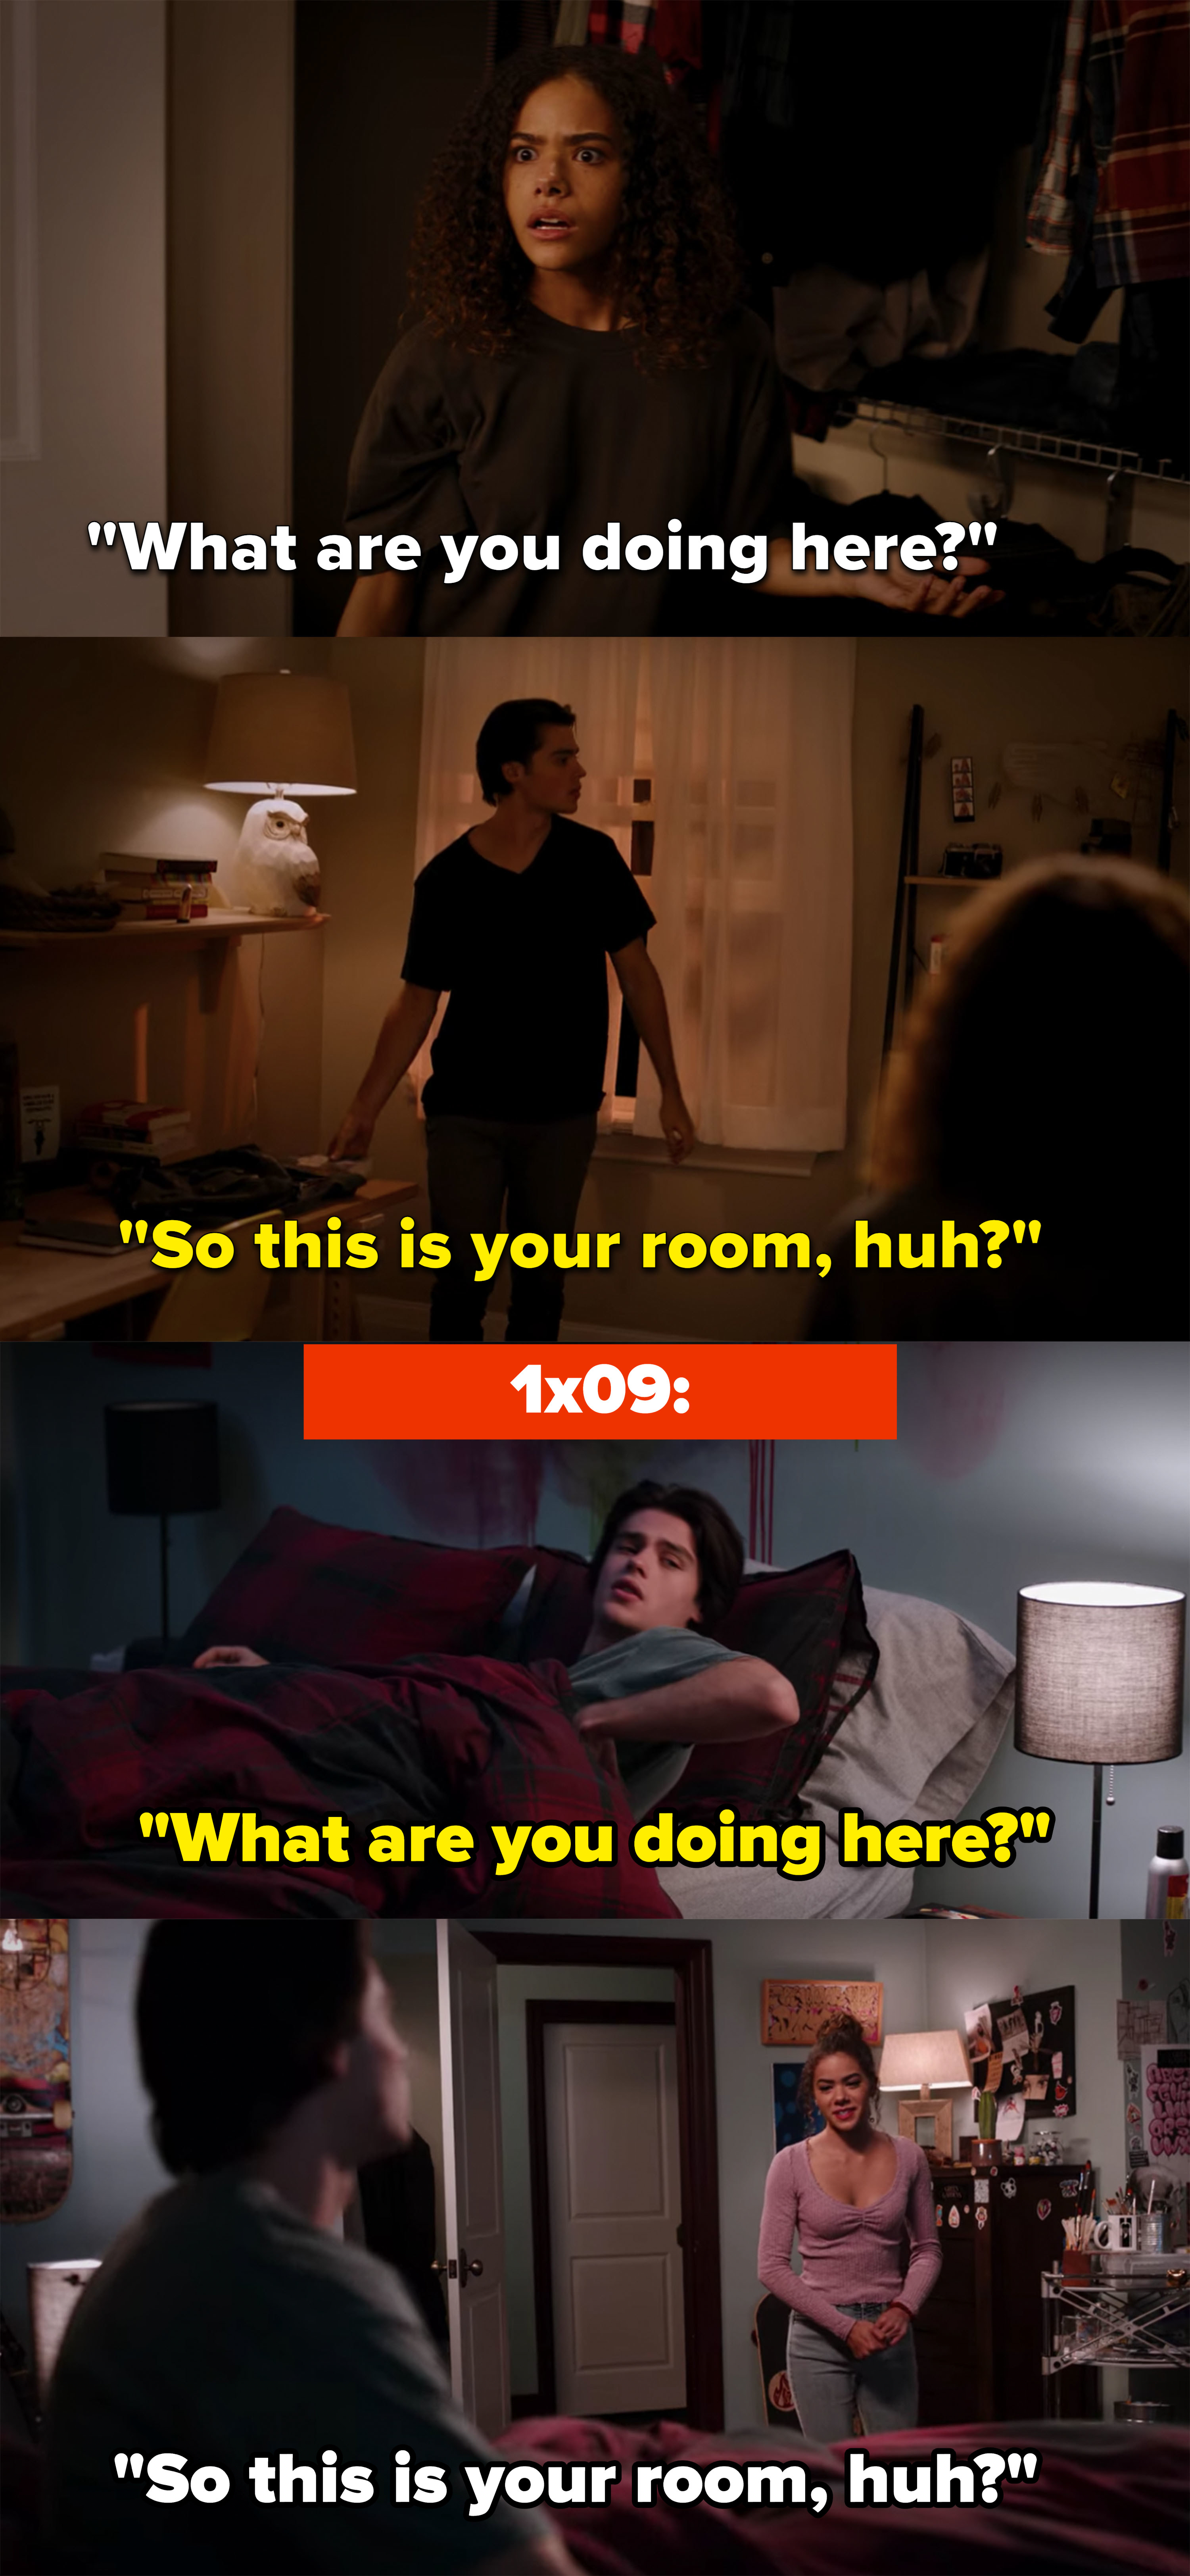 &quot;What are you doing here?&quot; &quot;So this is your room huh?&quot; said by both characters 